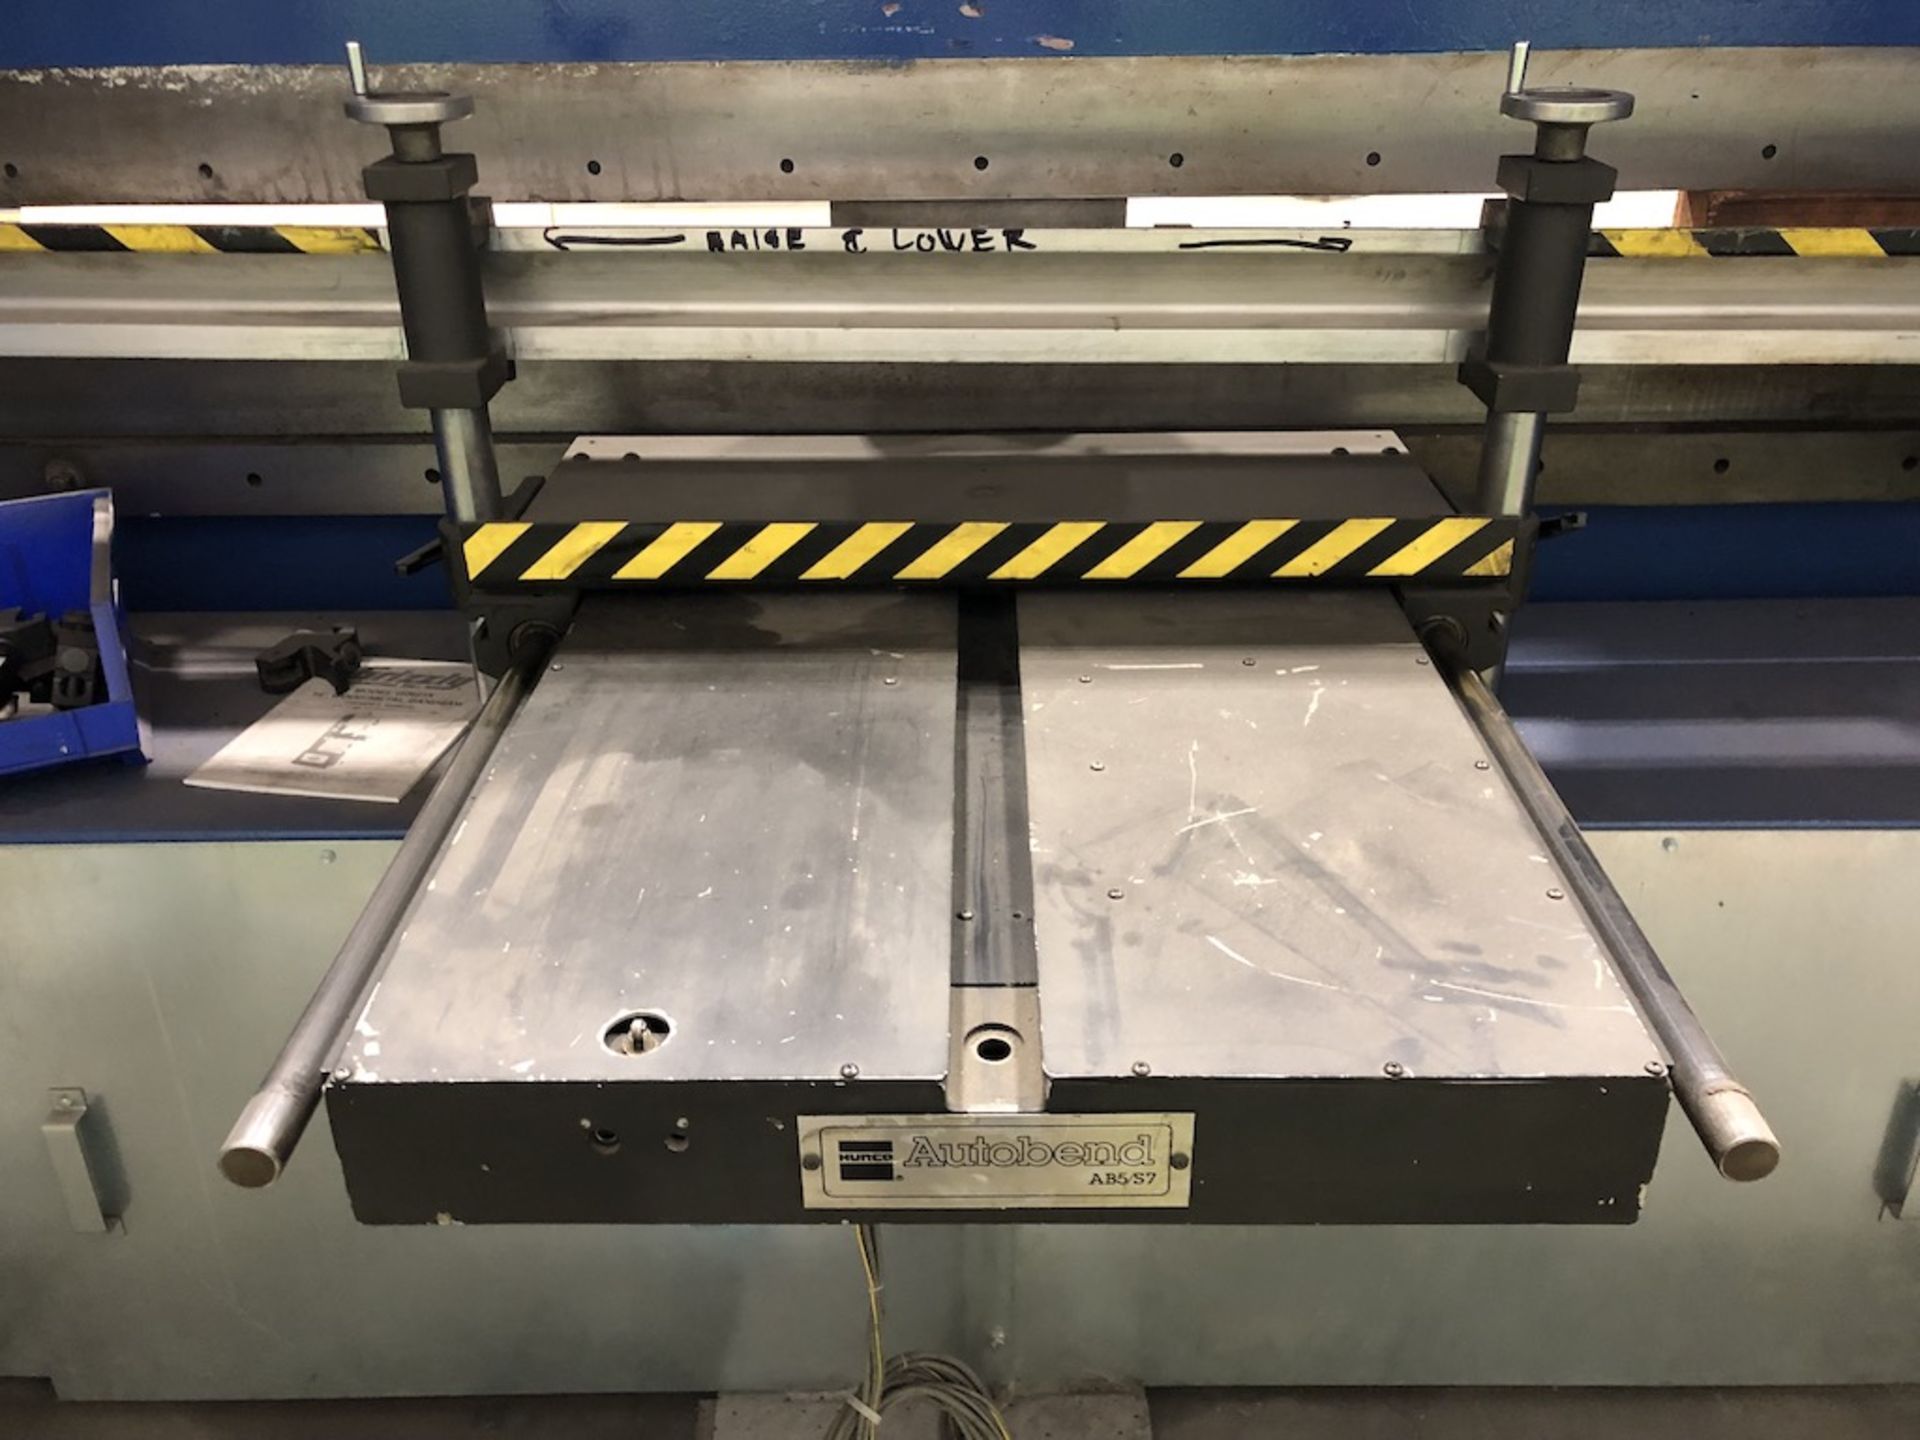 ACCURPRESS HURCO AUTOBEND AB5/S7 BACKGUAGE UPGRADE 10FT L X 4FT W X 7FT H - Image 12 of 17